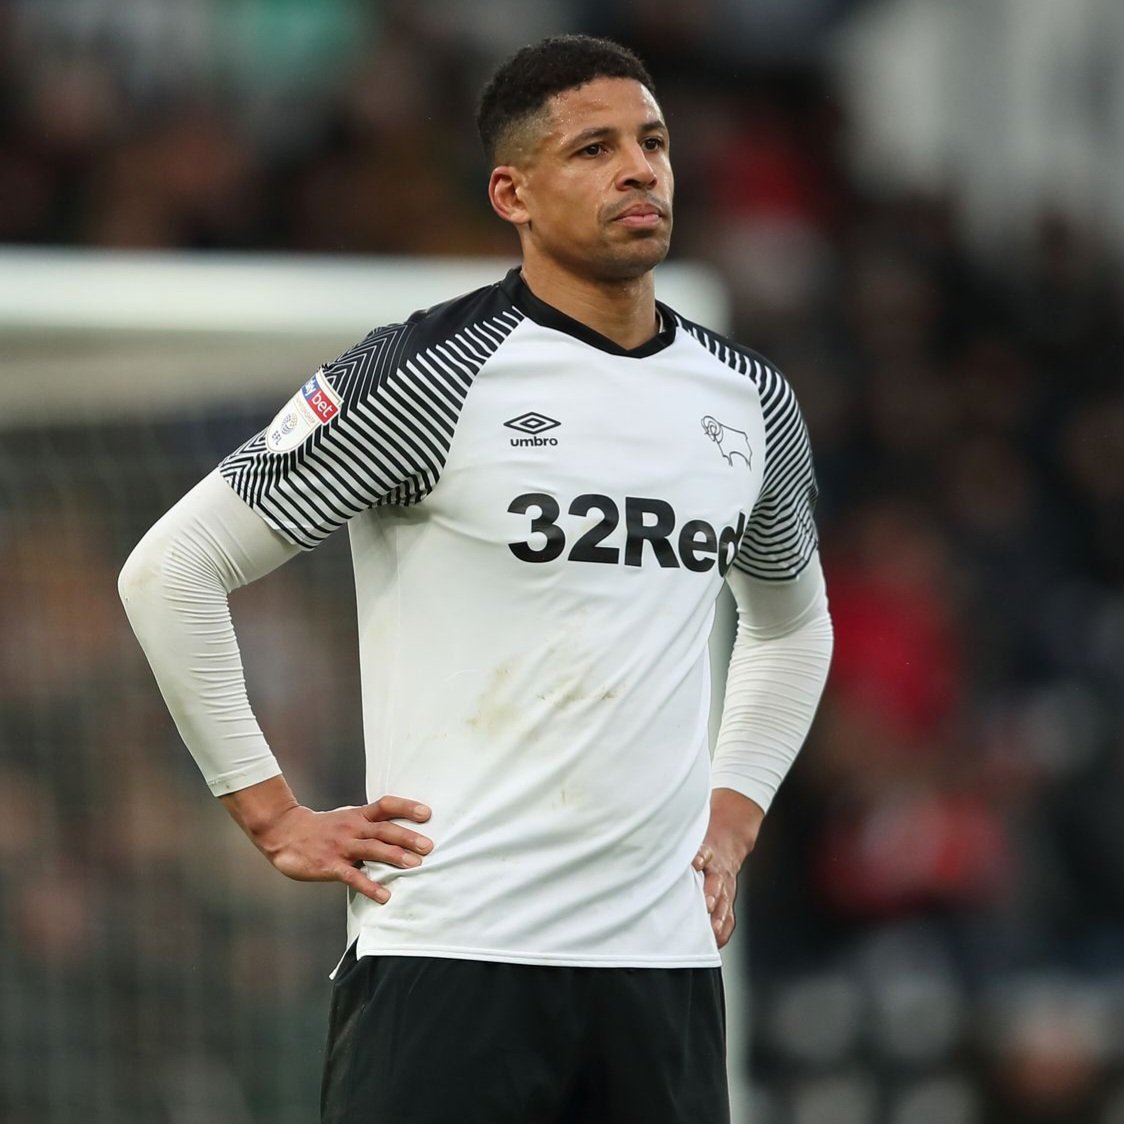 Cheltenham Town are interested in signing free agent defender Curtis Davies.

The 38-year-old is currently without a club following his release by Derby County, and The Robins are considering a potential swoop.

#cheltenham #cheltenhamtown #ctfc #transfers #league1 #football